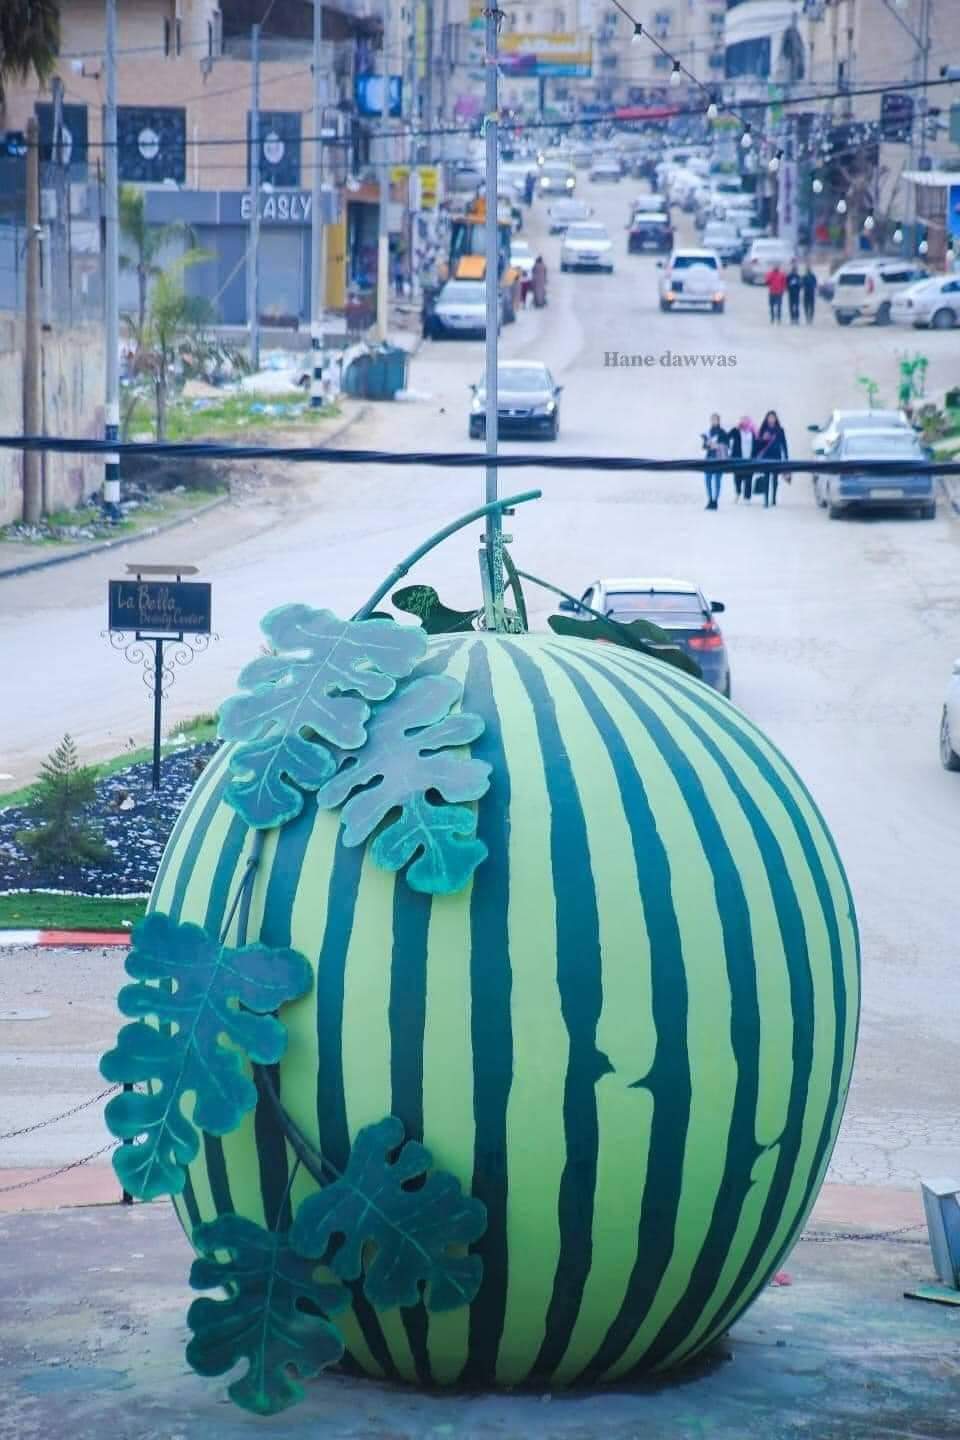 The watermelon monument in Jenin symbolised the region’s agricultural richness